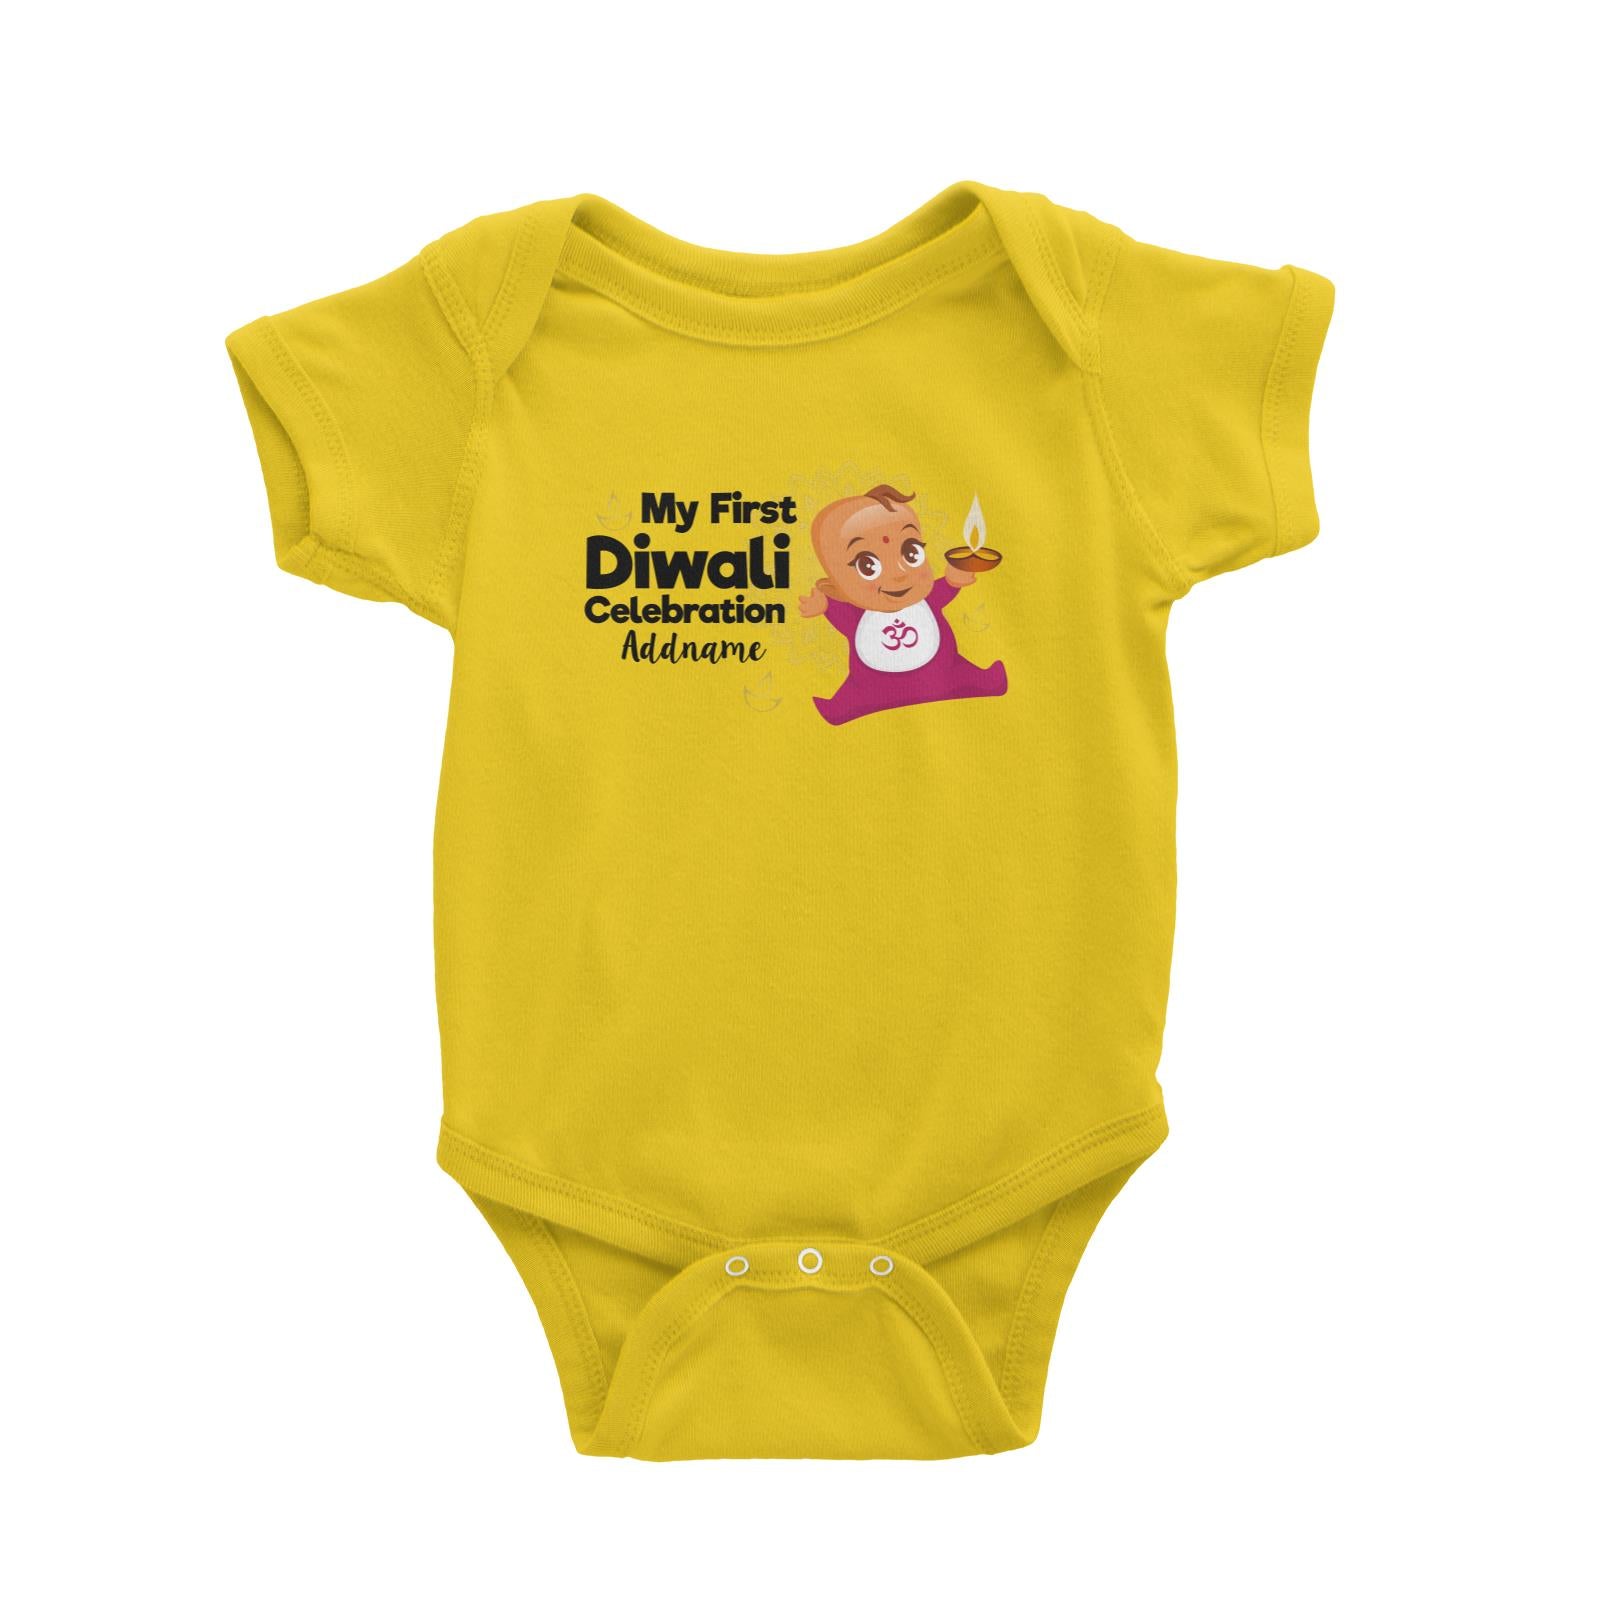 Cute Baby My First Diwali Celebration Addname Baby Romper